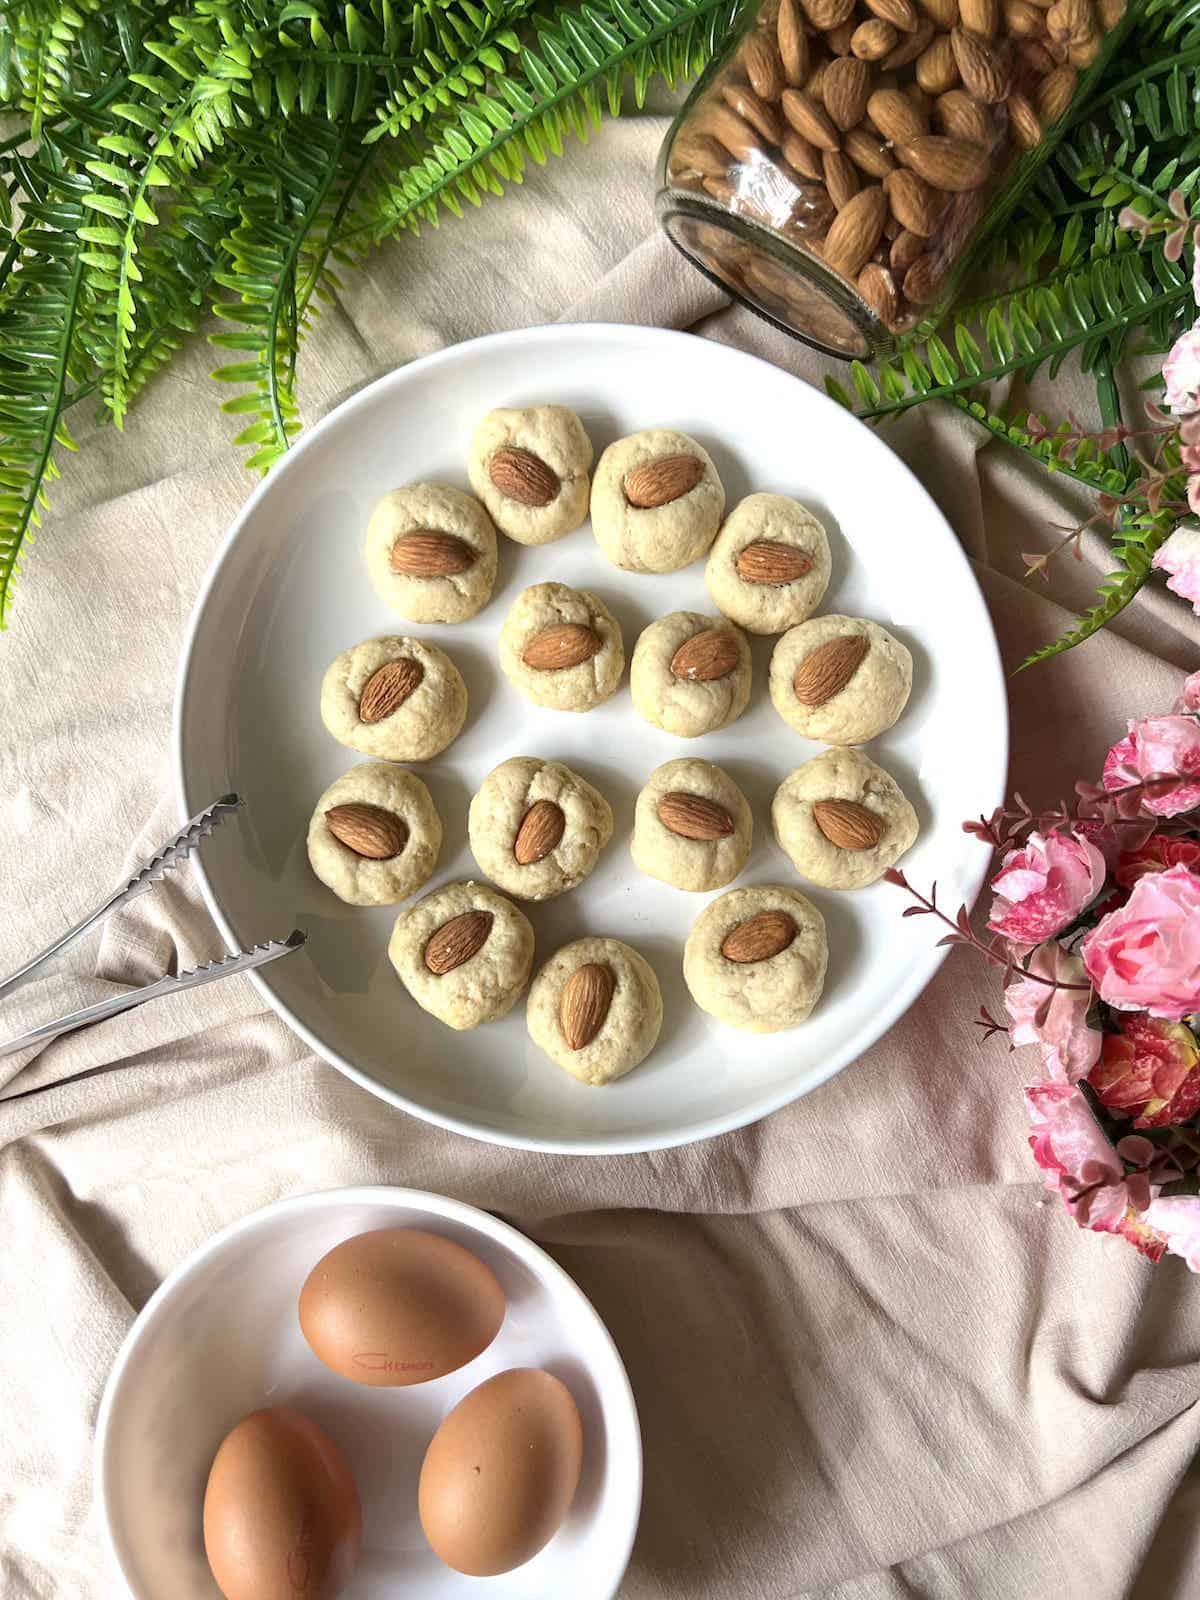 Many round almond cookies on a white plate.